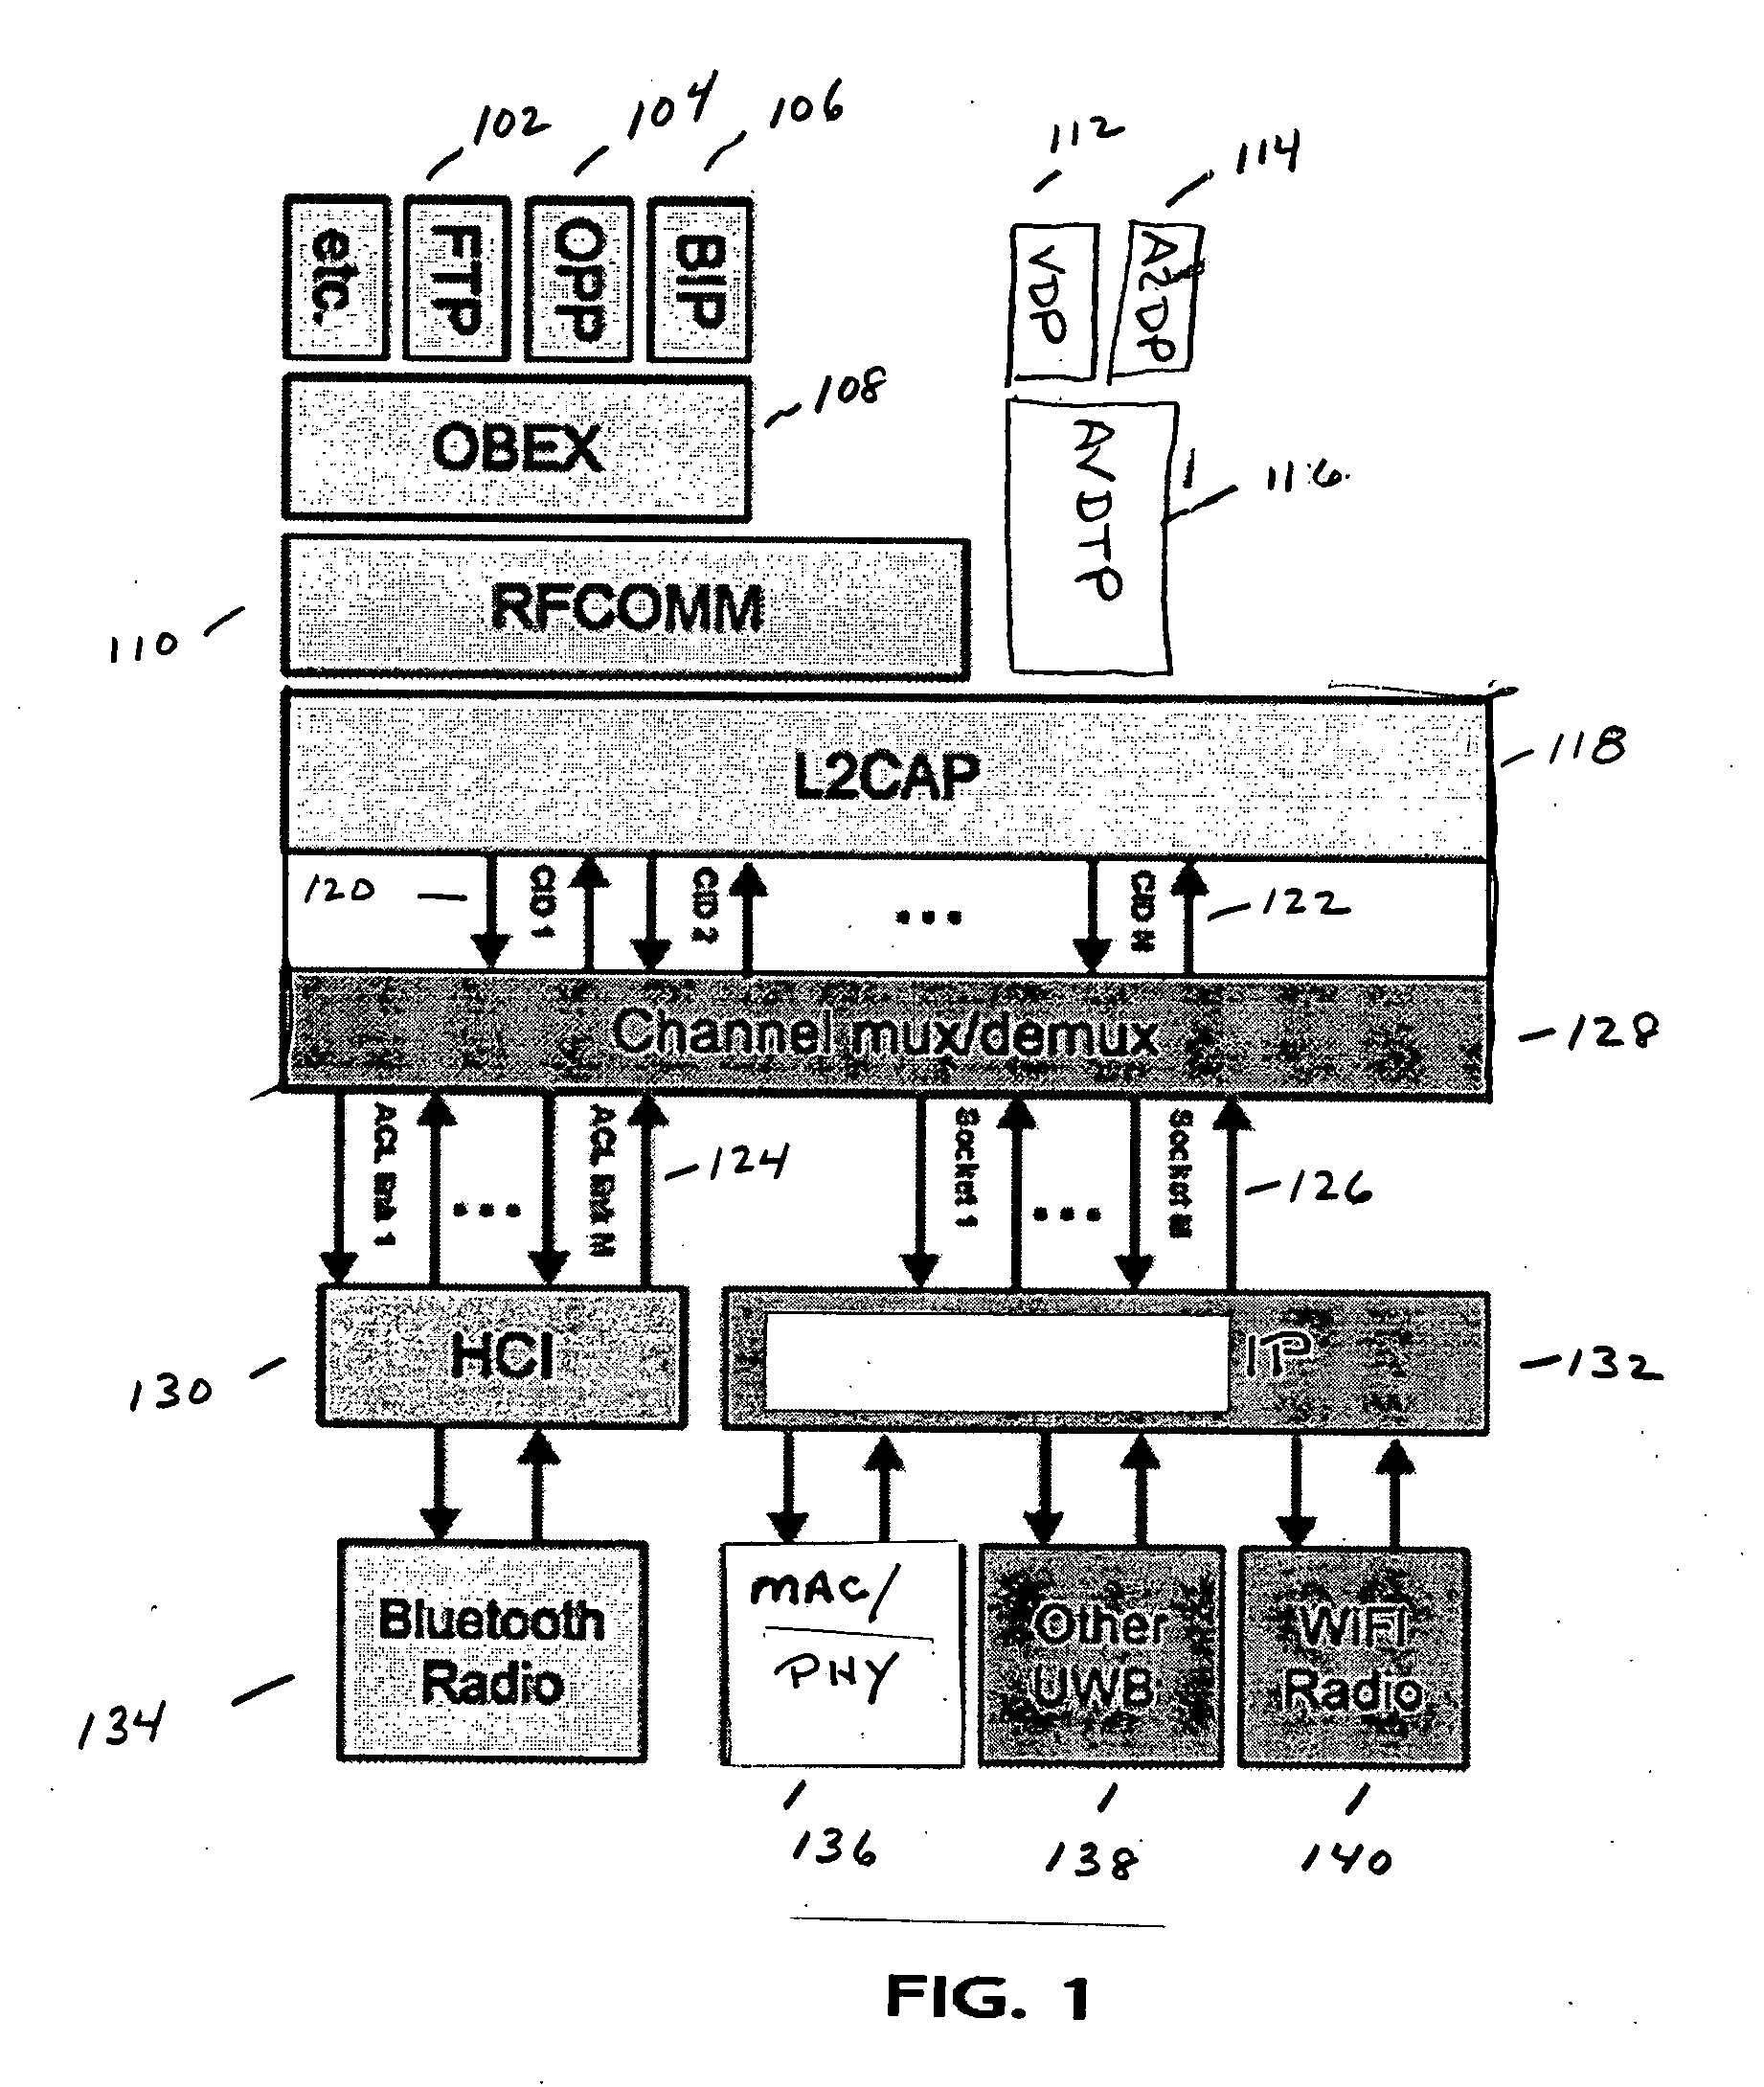 Using Bluetooth to establish ad-hoc connections between non-Bluetooth wireless communication modules